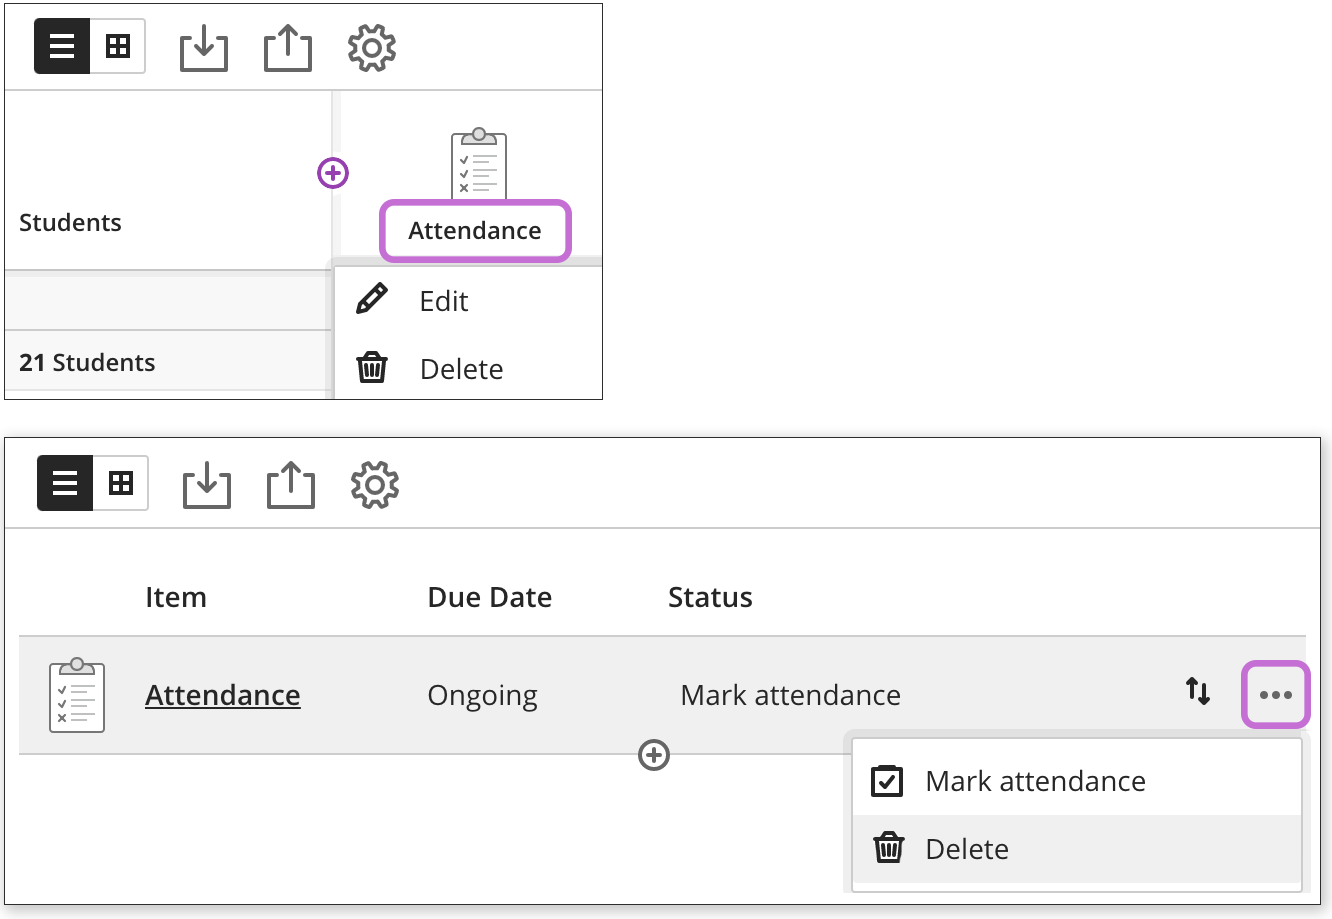 At the top, the Gradebook on its grid view is open with the Attendance column heading selected and the "Delete" option displayed. At the bottom, the Gradebook is open with the three dots menu selected and the "Delete" option displayed.